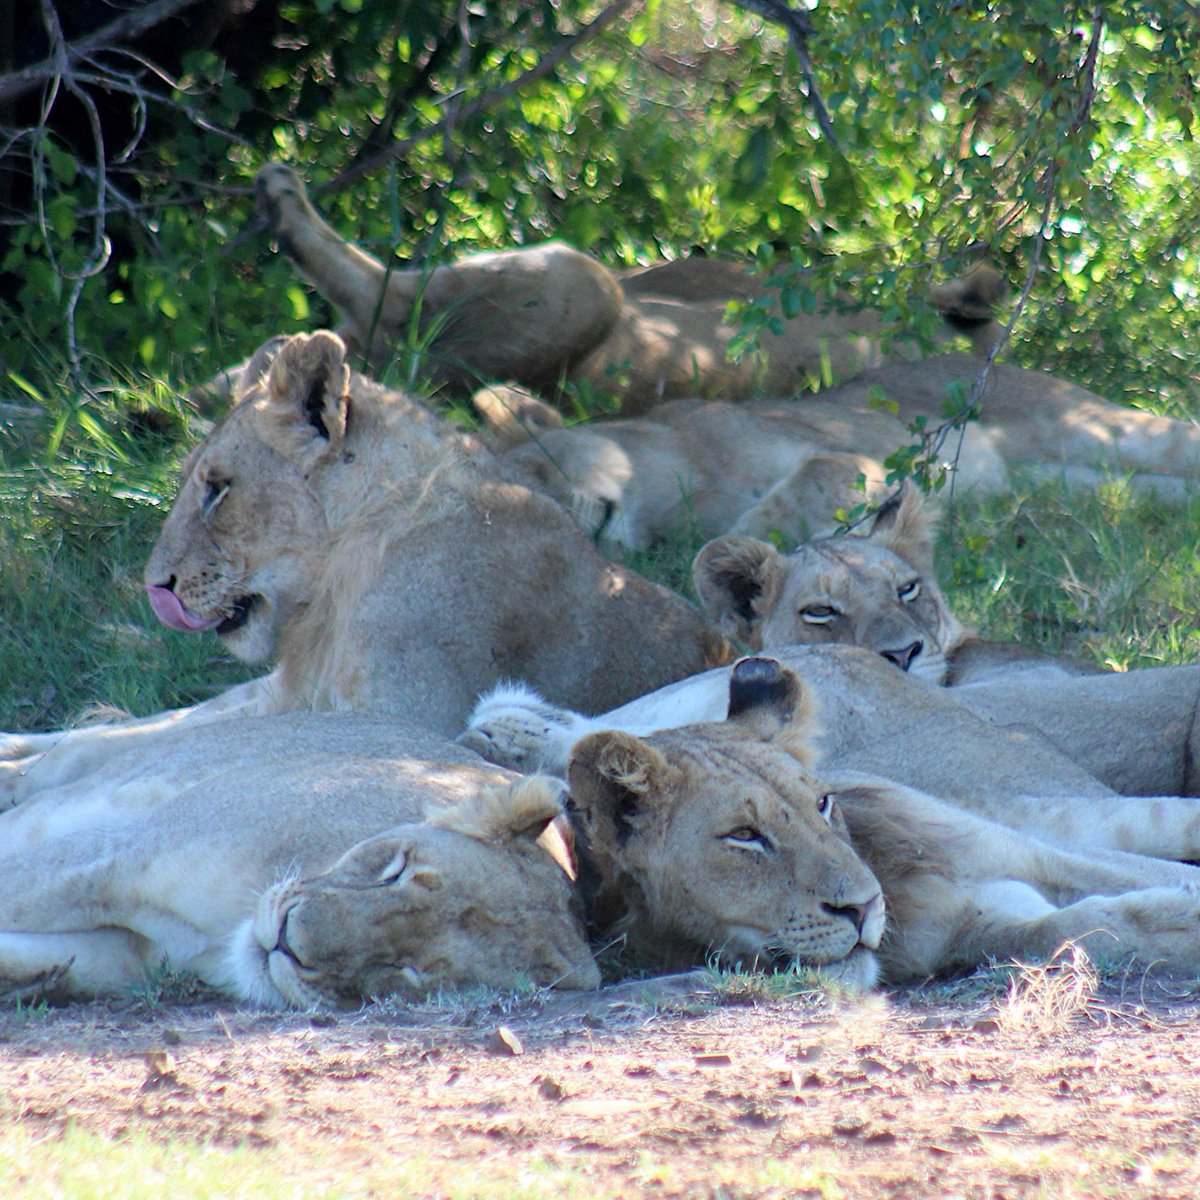 Lounging around after a great lunch... what you up to? #lionlounge #lions #big5 #bigfive #africa #krugernationalpark #saturdaychill #summerheat